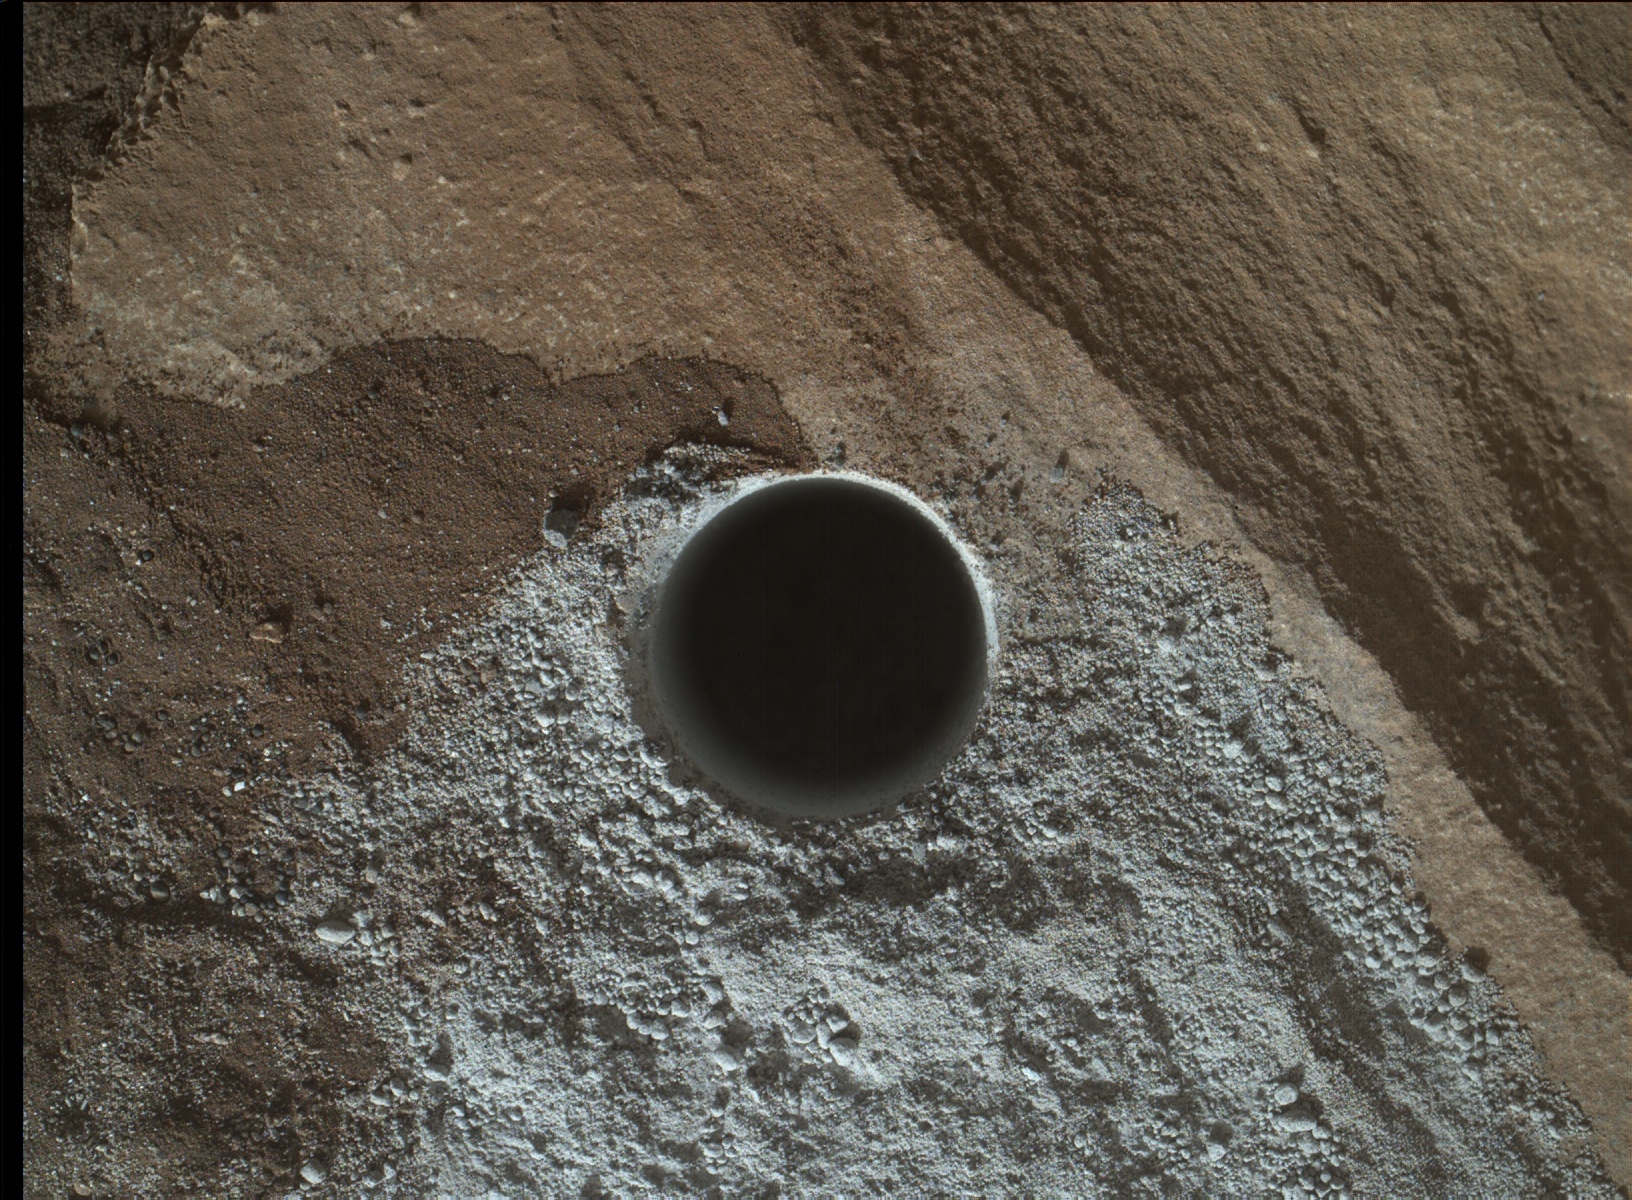 Nasa's Mars rover Curiosity acquired this image using its Mars Hand Lens Imager (MAHLI) on Sol 1321